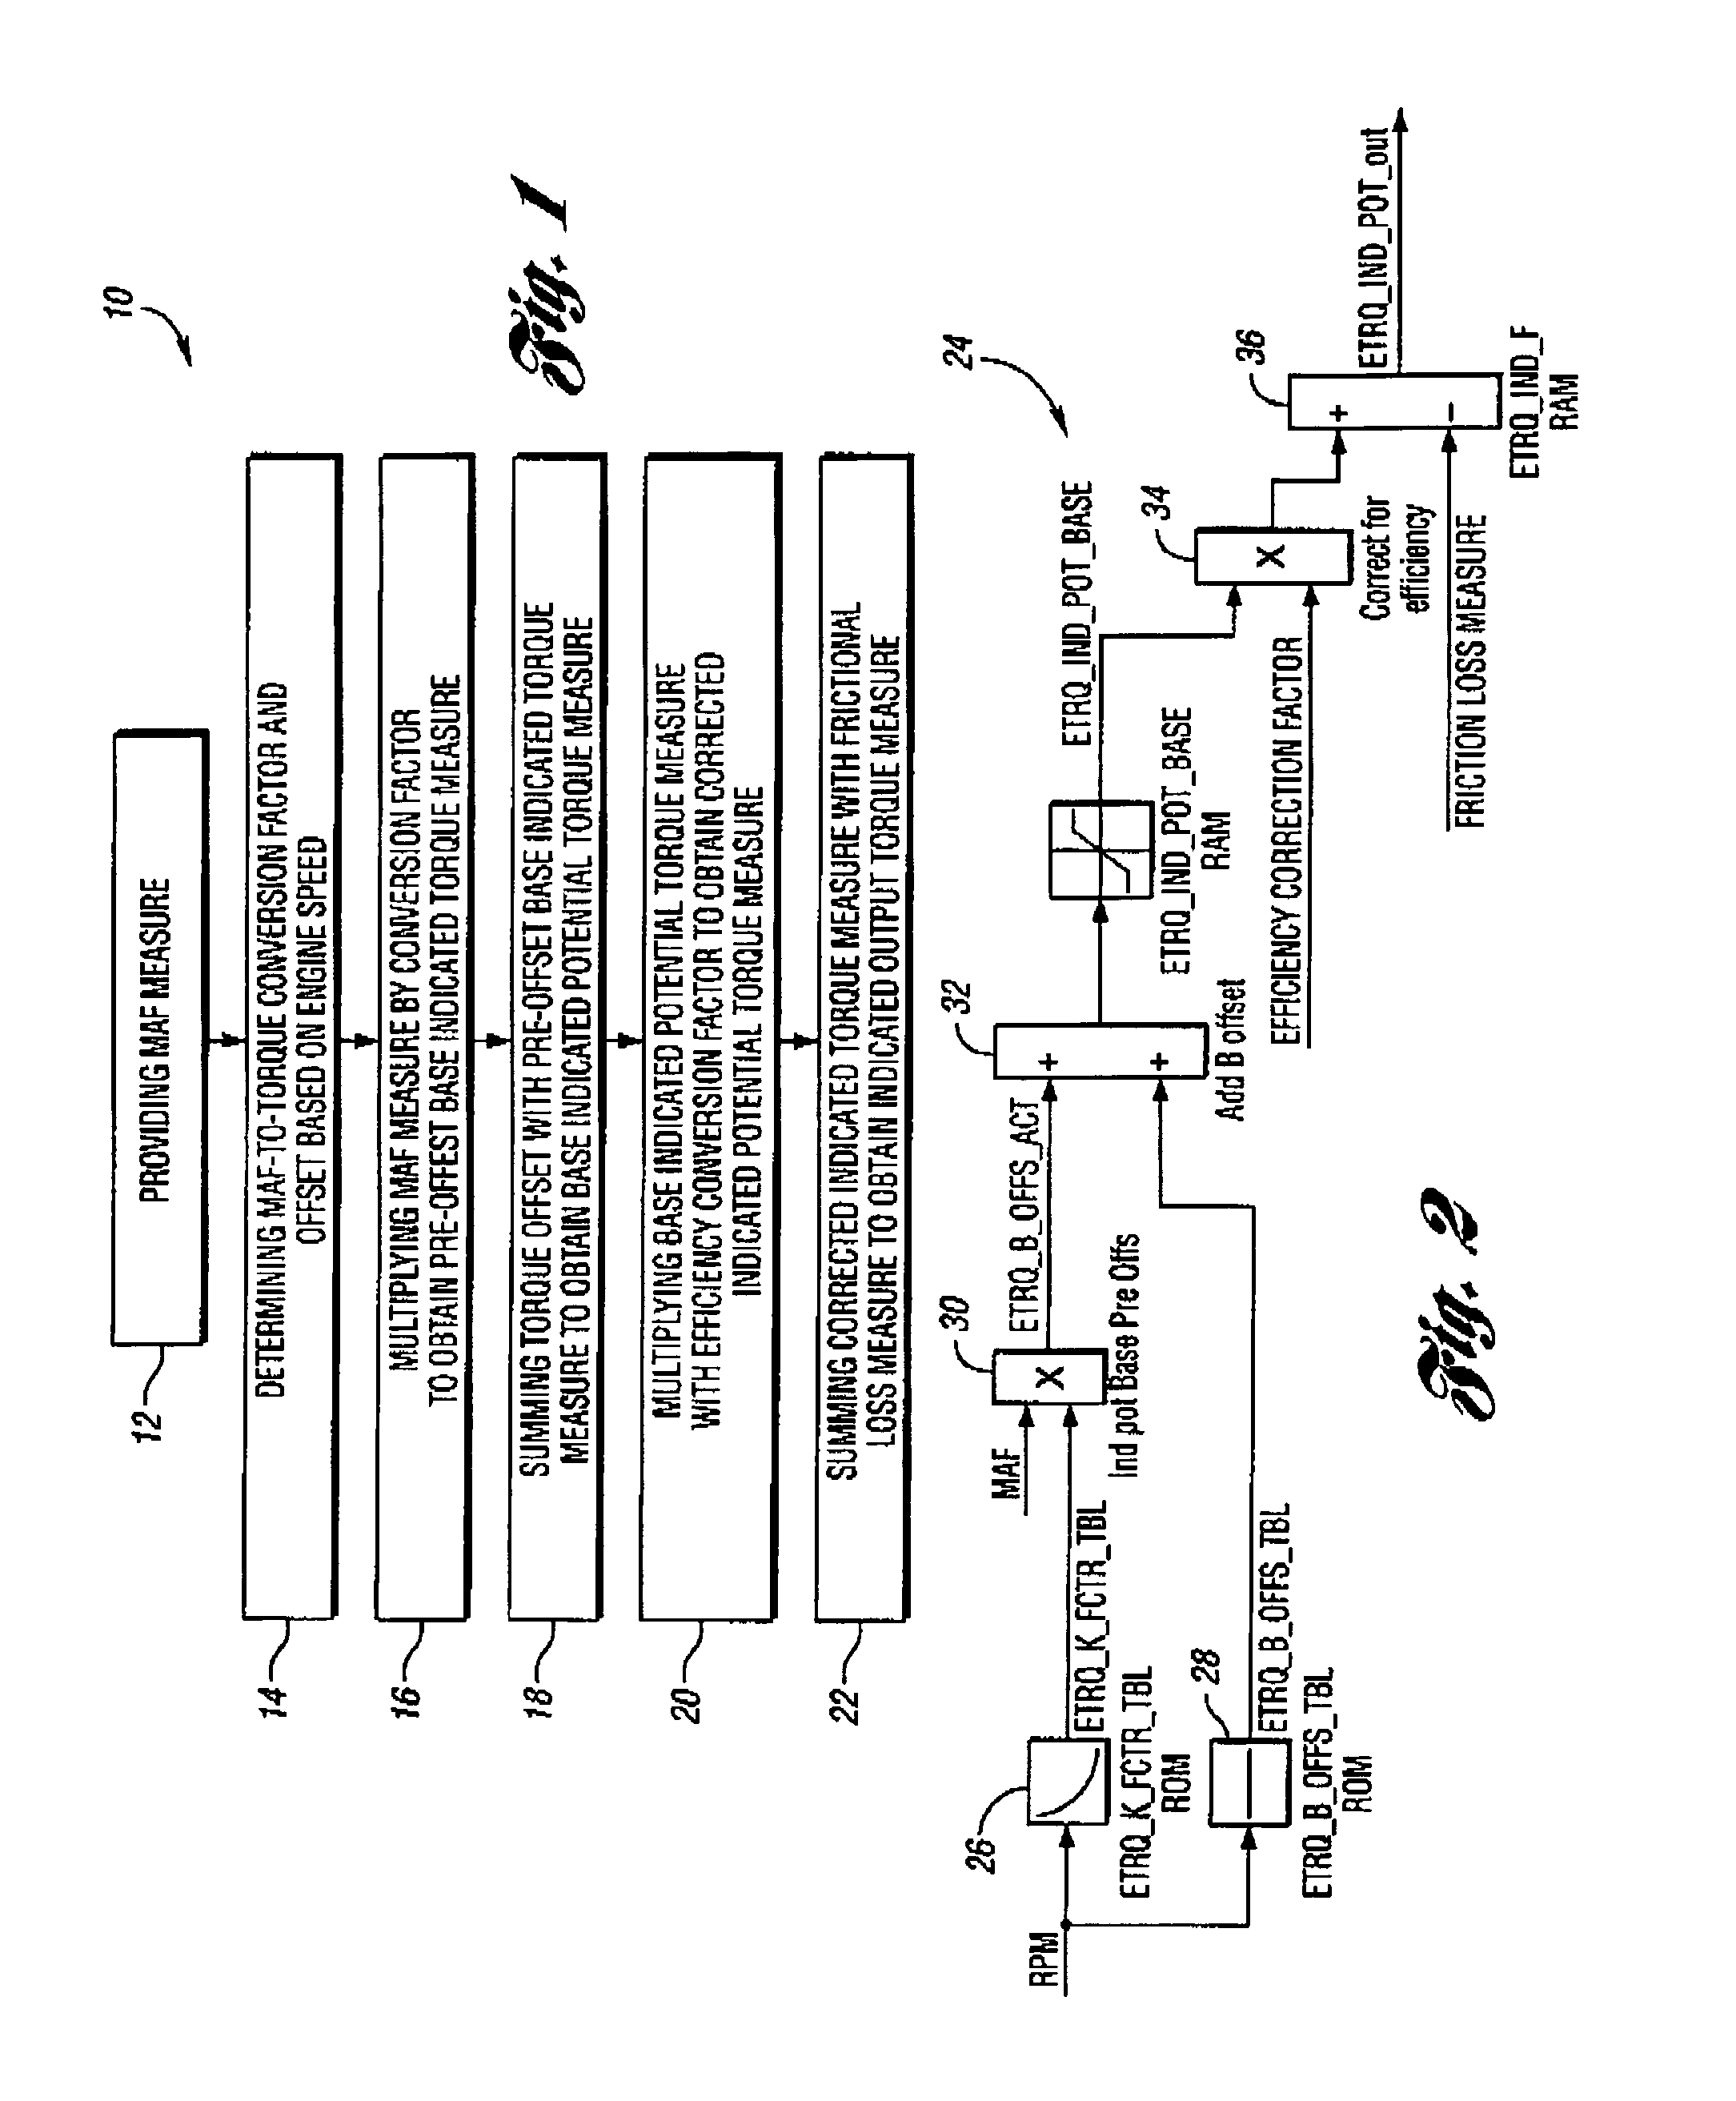 Airflow-based output torque estimation for multi-displacement engine